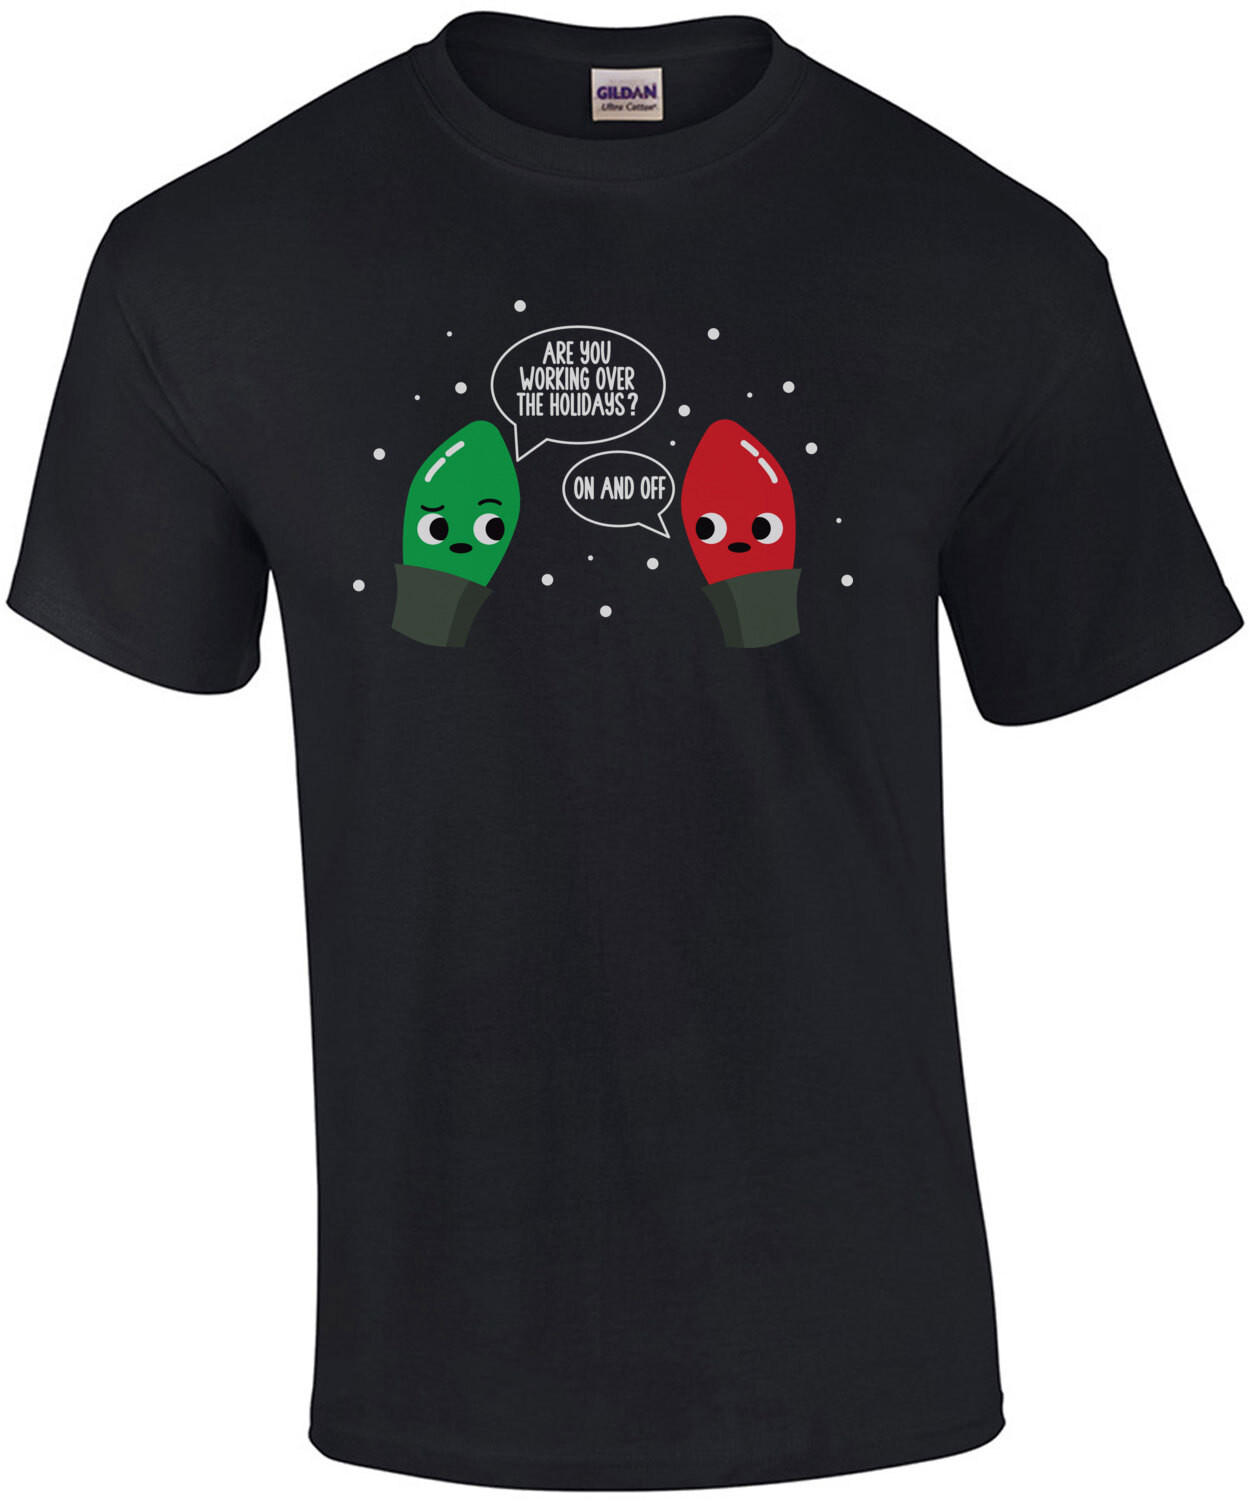 Are you working over the holidays? On and off. Funny pun Christmas lights t-shirt